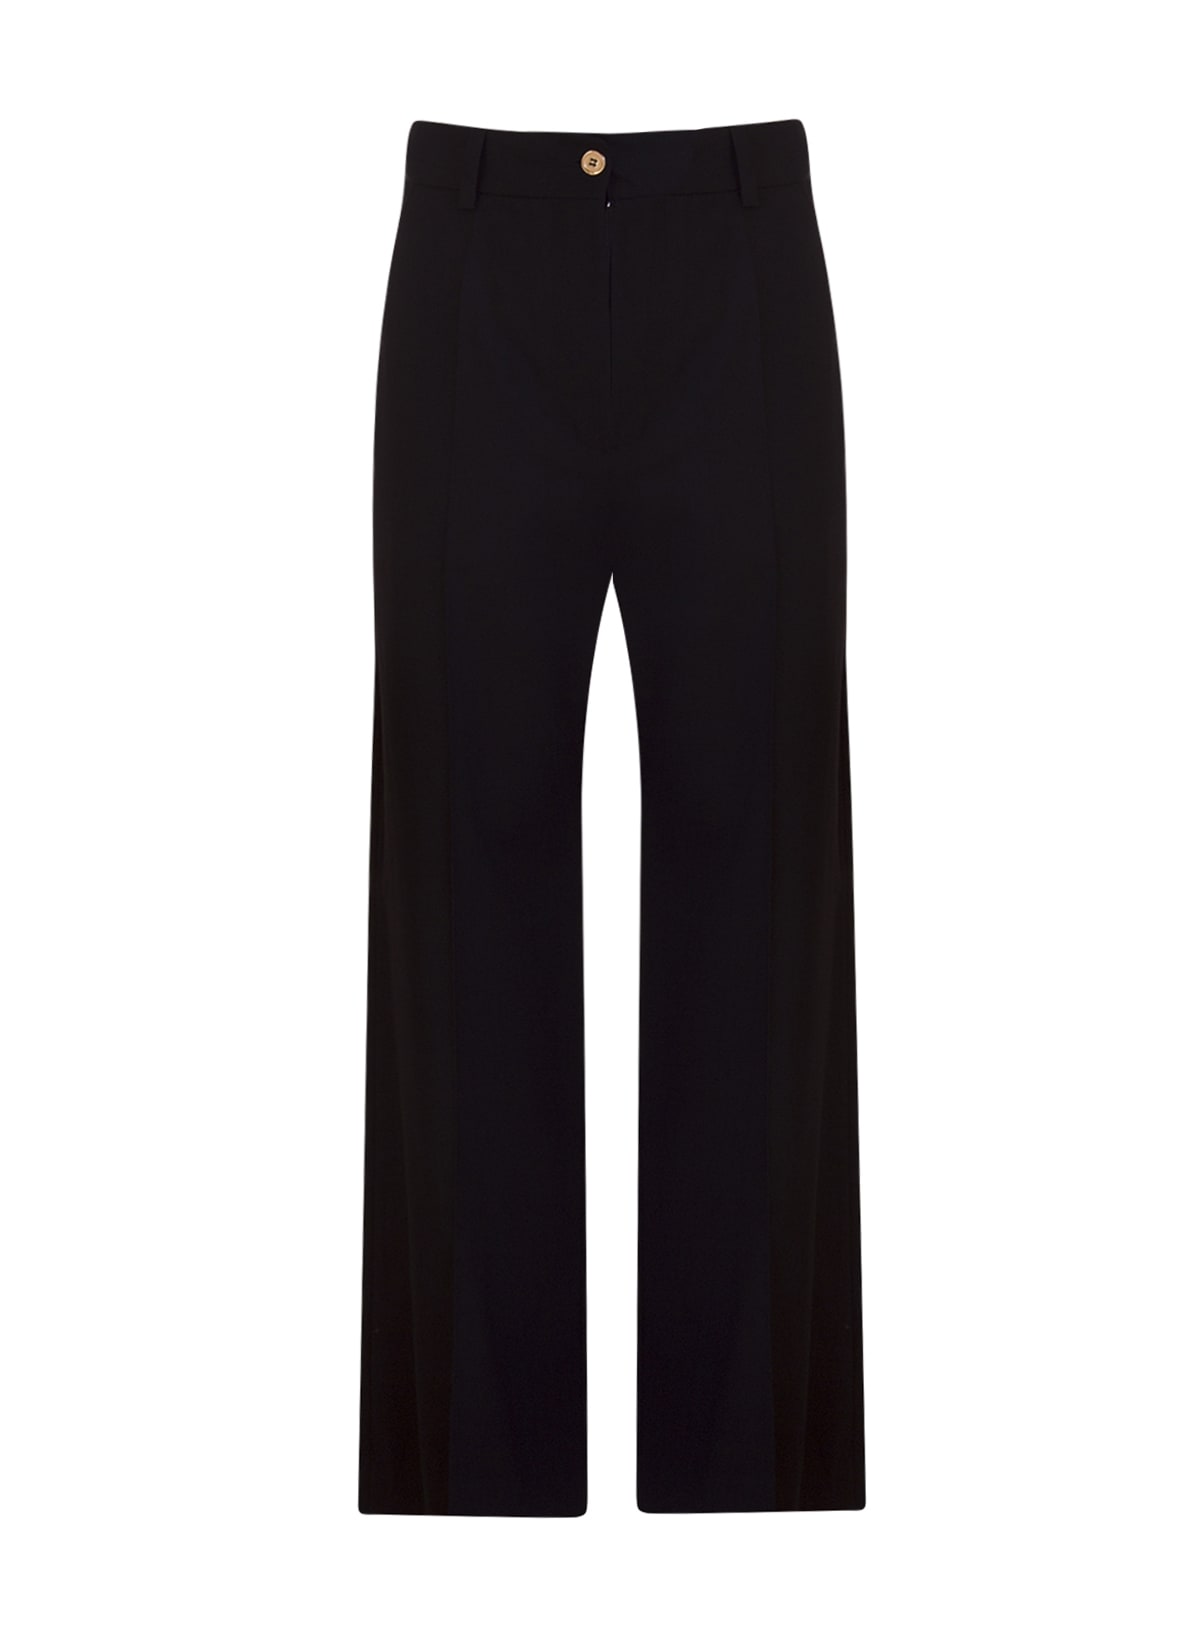 PATOU ICONIC WOOL TROUSERS,TR0020005 999B